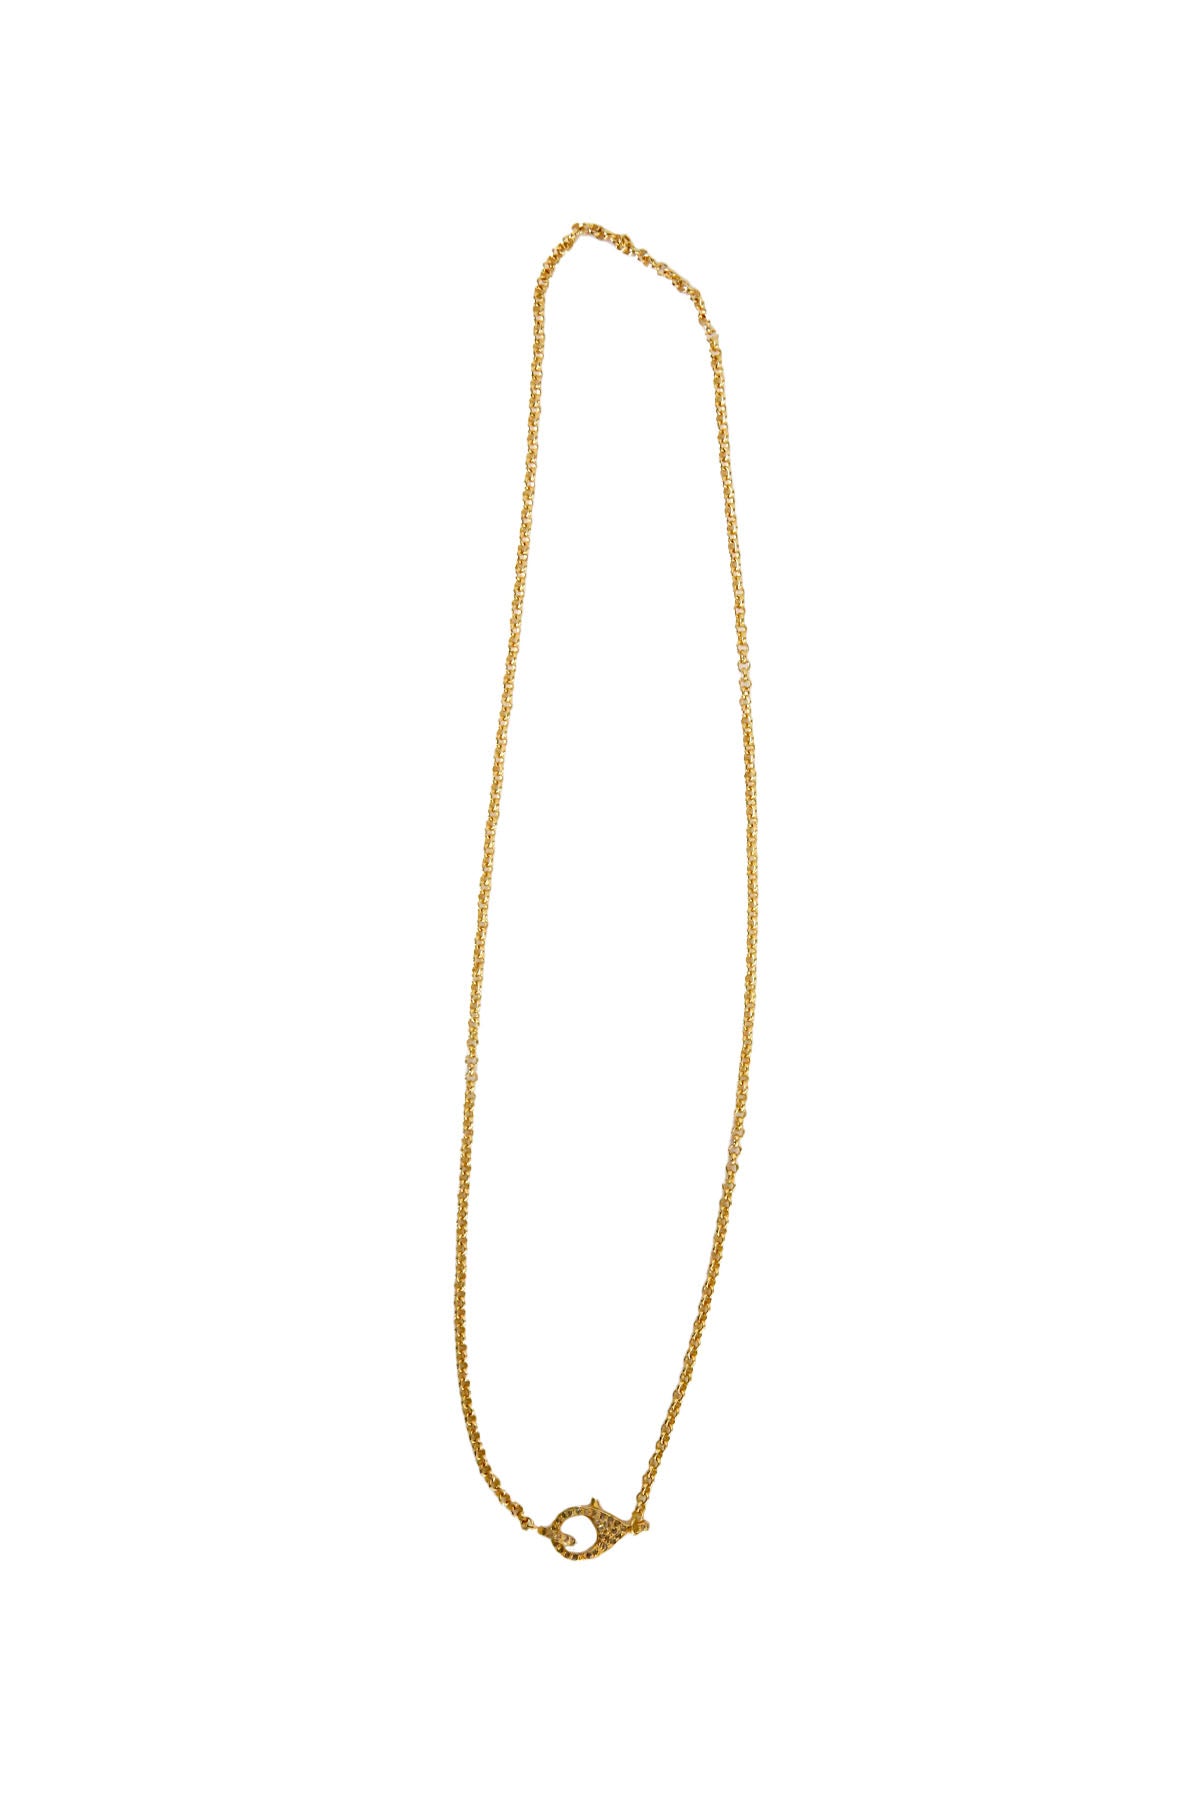 22kt gold over brass thin chain w/pave diamond clasp- 17"